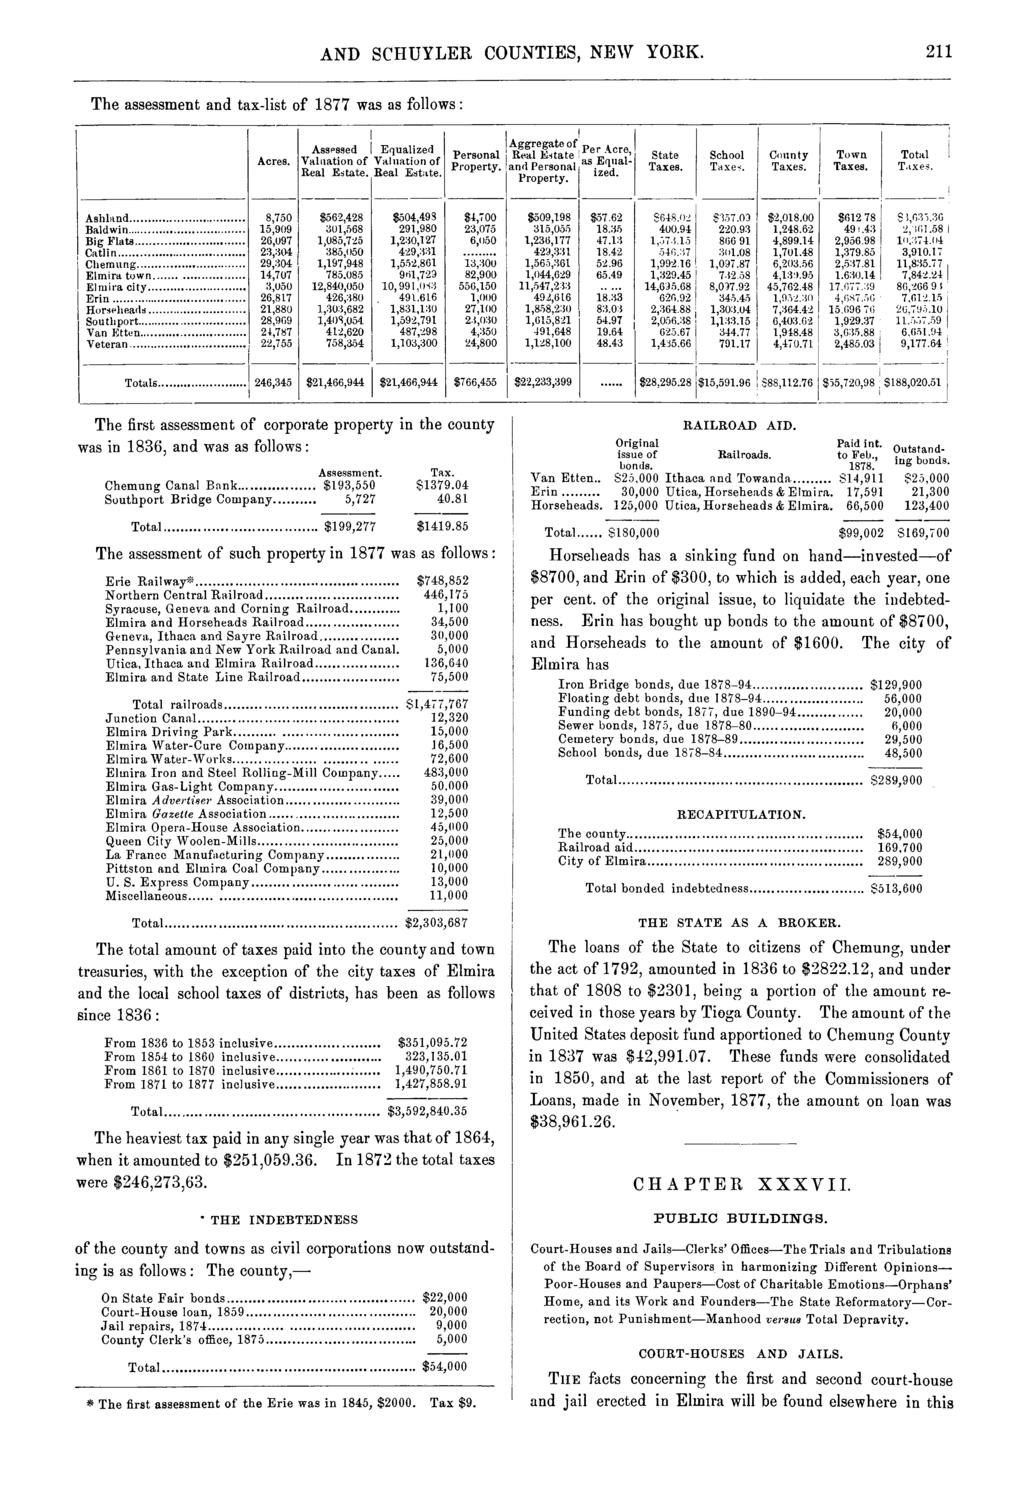 AND SCHUYLER COUNTIES, NEW YORK. 211 The assessment tax-list of 1877 was as follows : Acres. I Asspssed Equalized Valuation of Valuation of Real Estate. Real Estate. Personal Property. Aggregate of p.